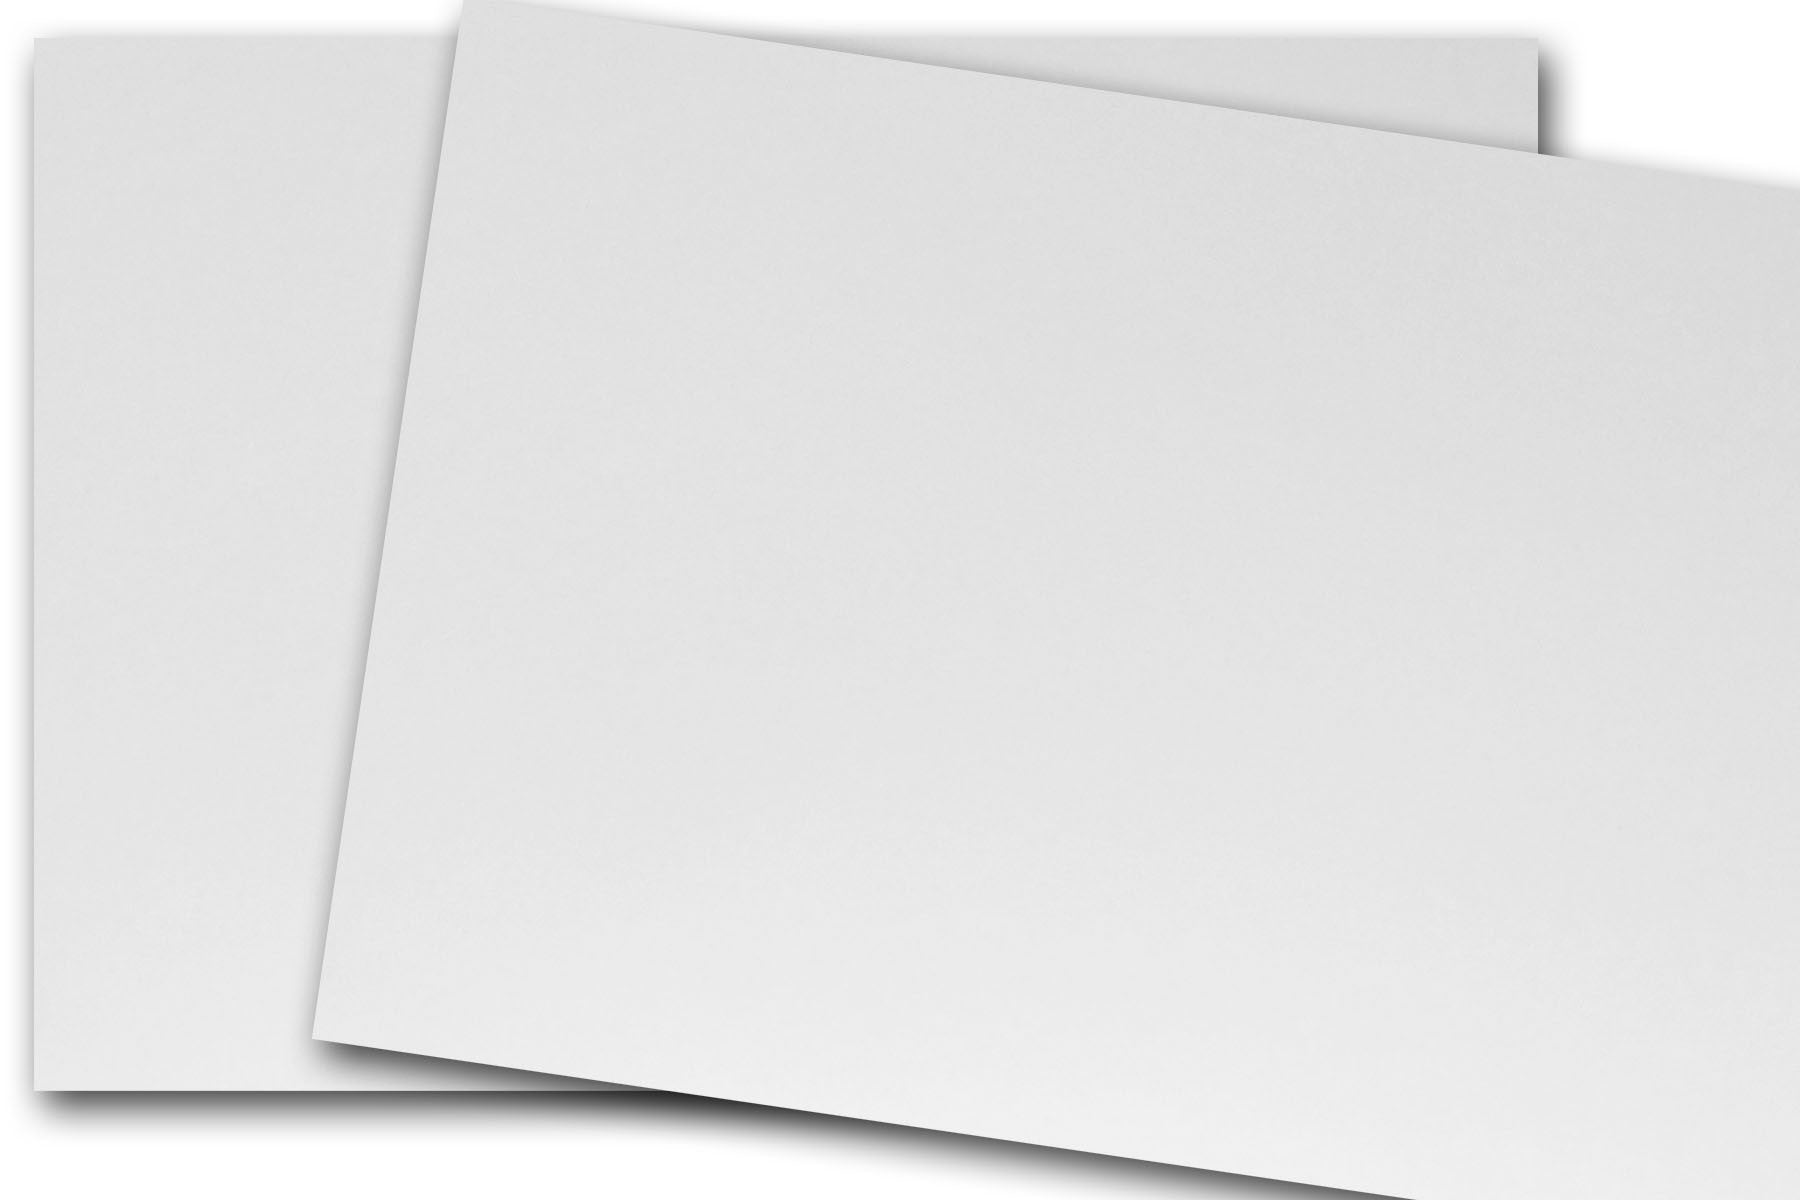 Heavy White 100 lb Linen Card Stock for DIY Invitations and CardMaking -  CutCardStock